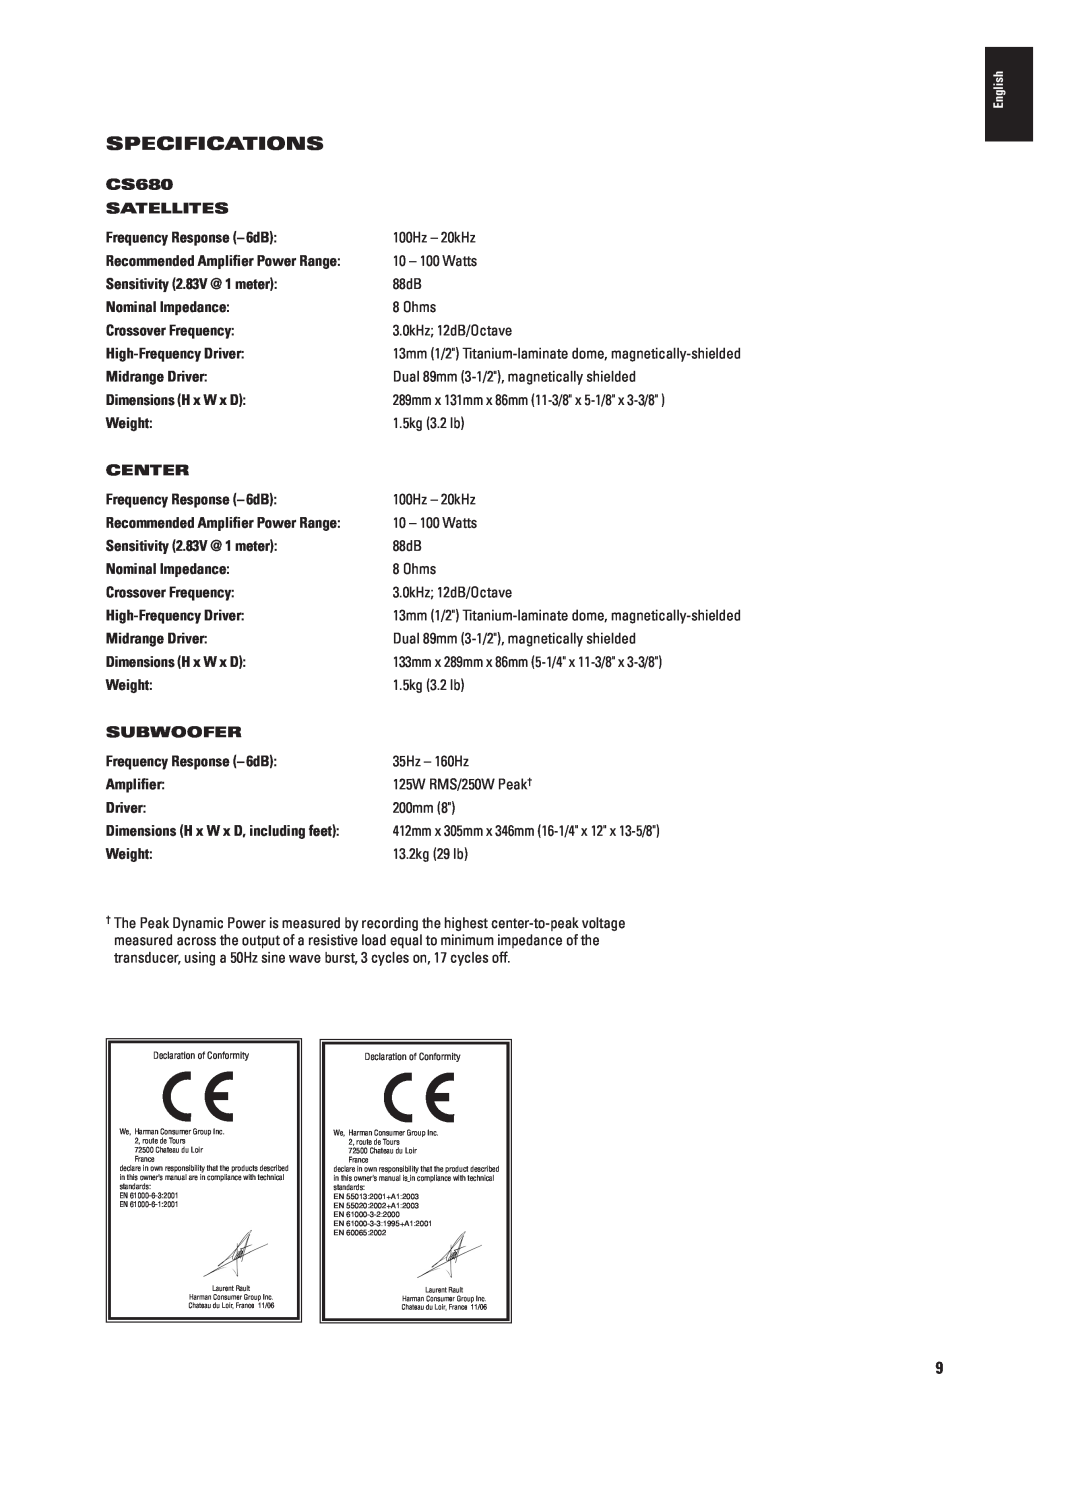 JBL CS680 (230V) manual Specifications, CS680 SATELLITES, Nominal Impedance Crossover Frequency 